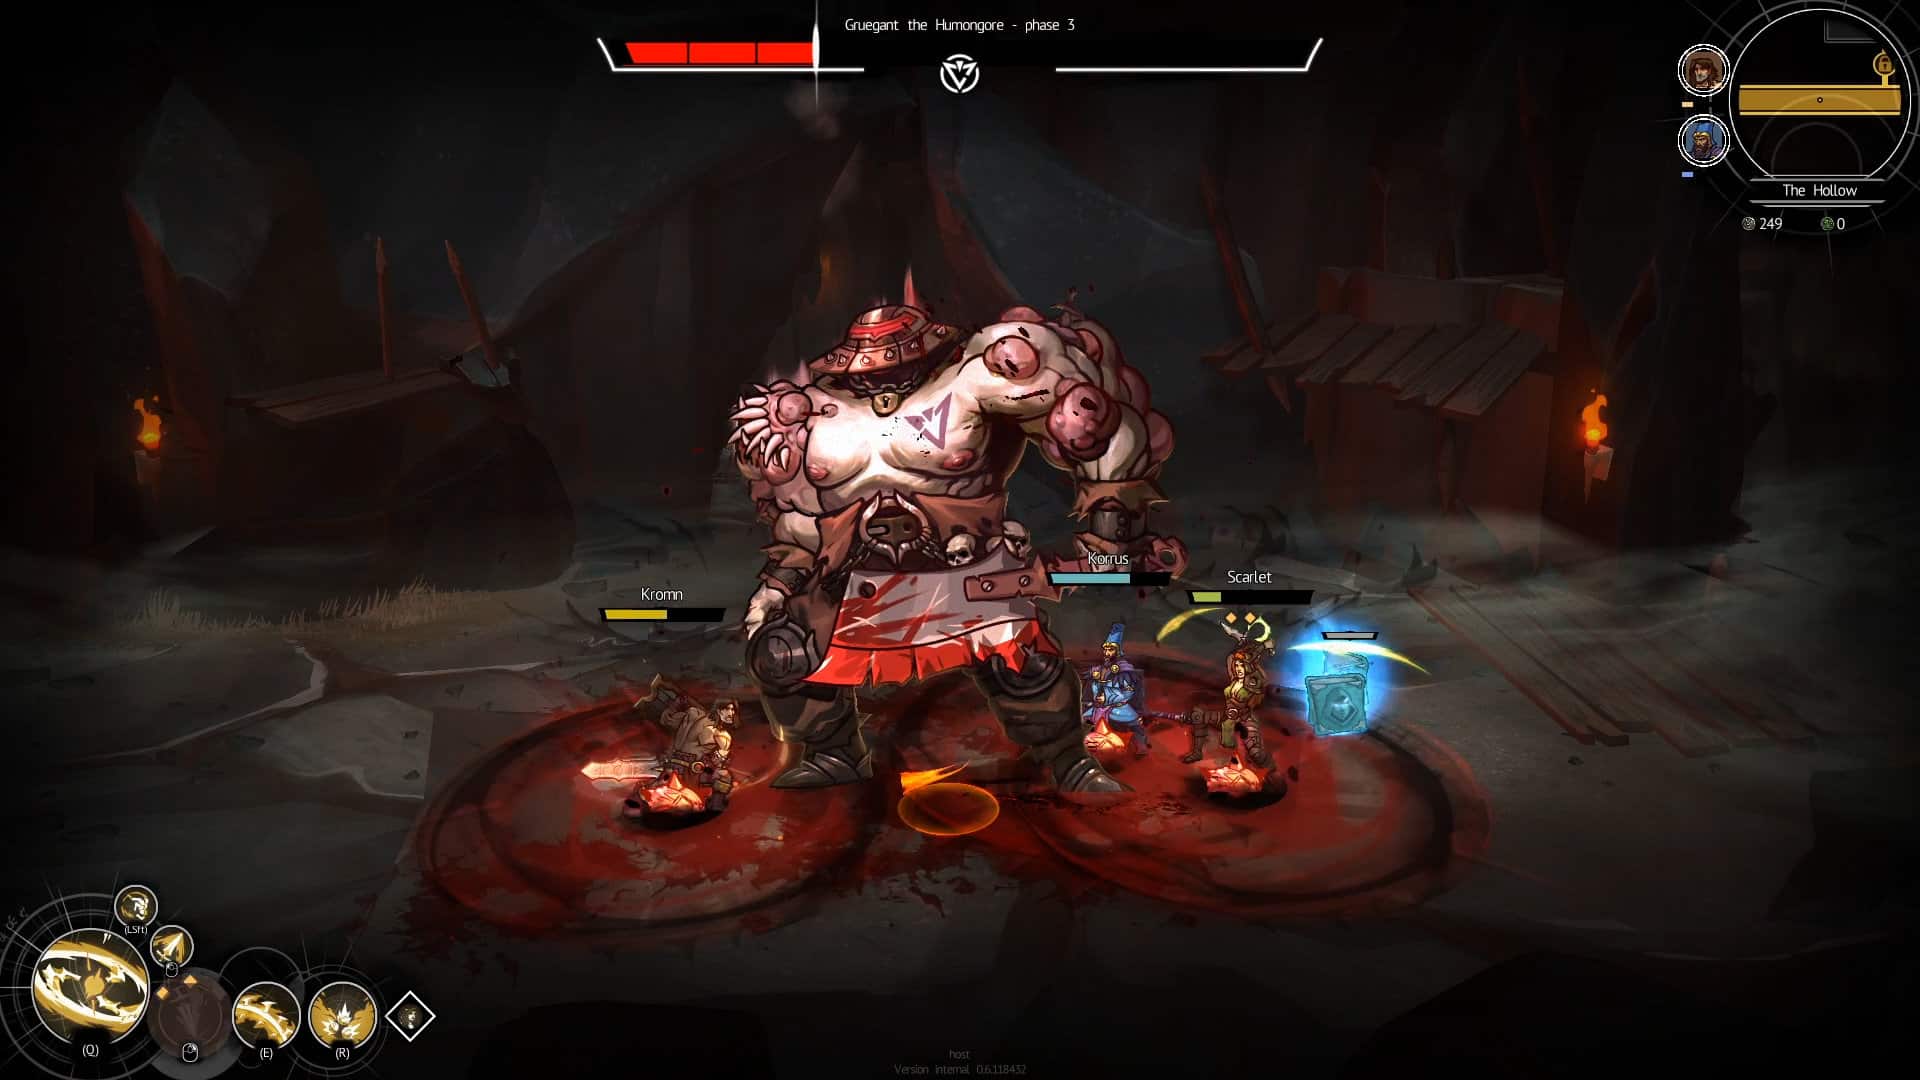 Blightbound is a co-op dungeon crawler launching today on PC and consoles